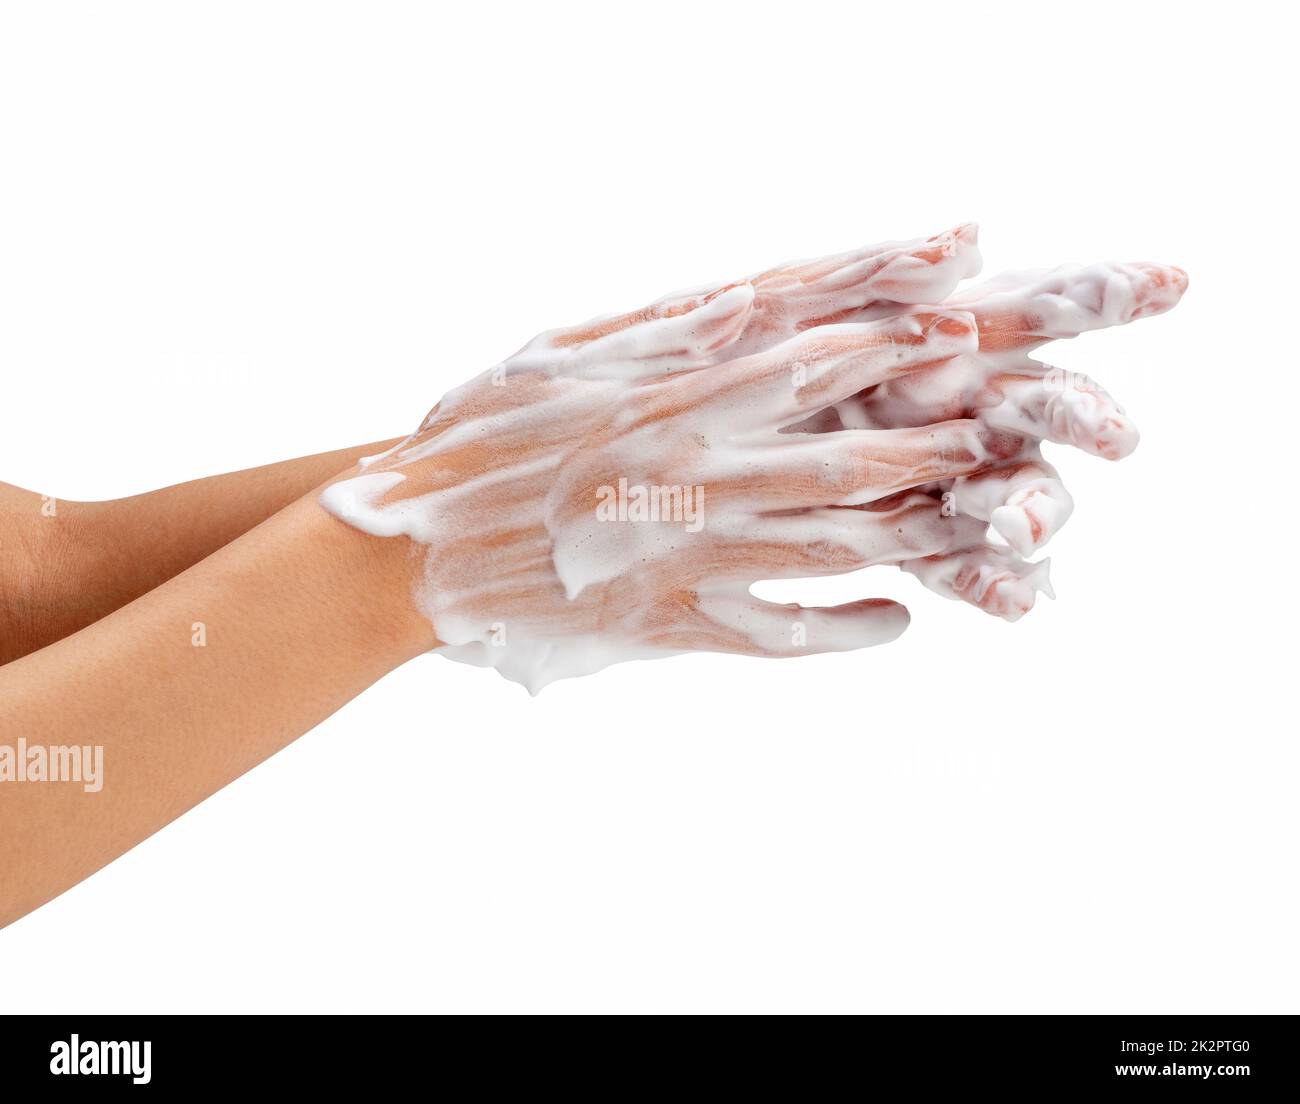 Female hand washing hands with soap lather on white background. Stock Photo